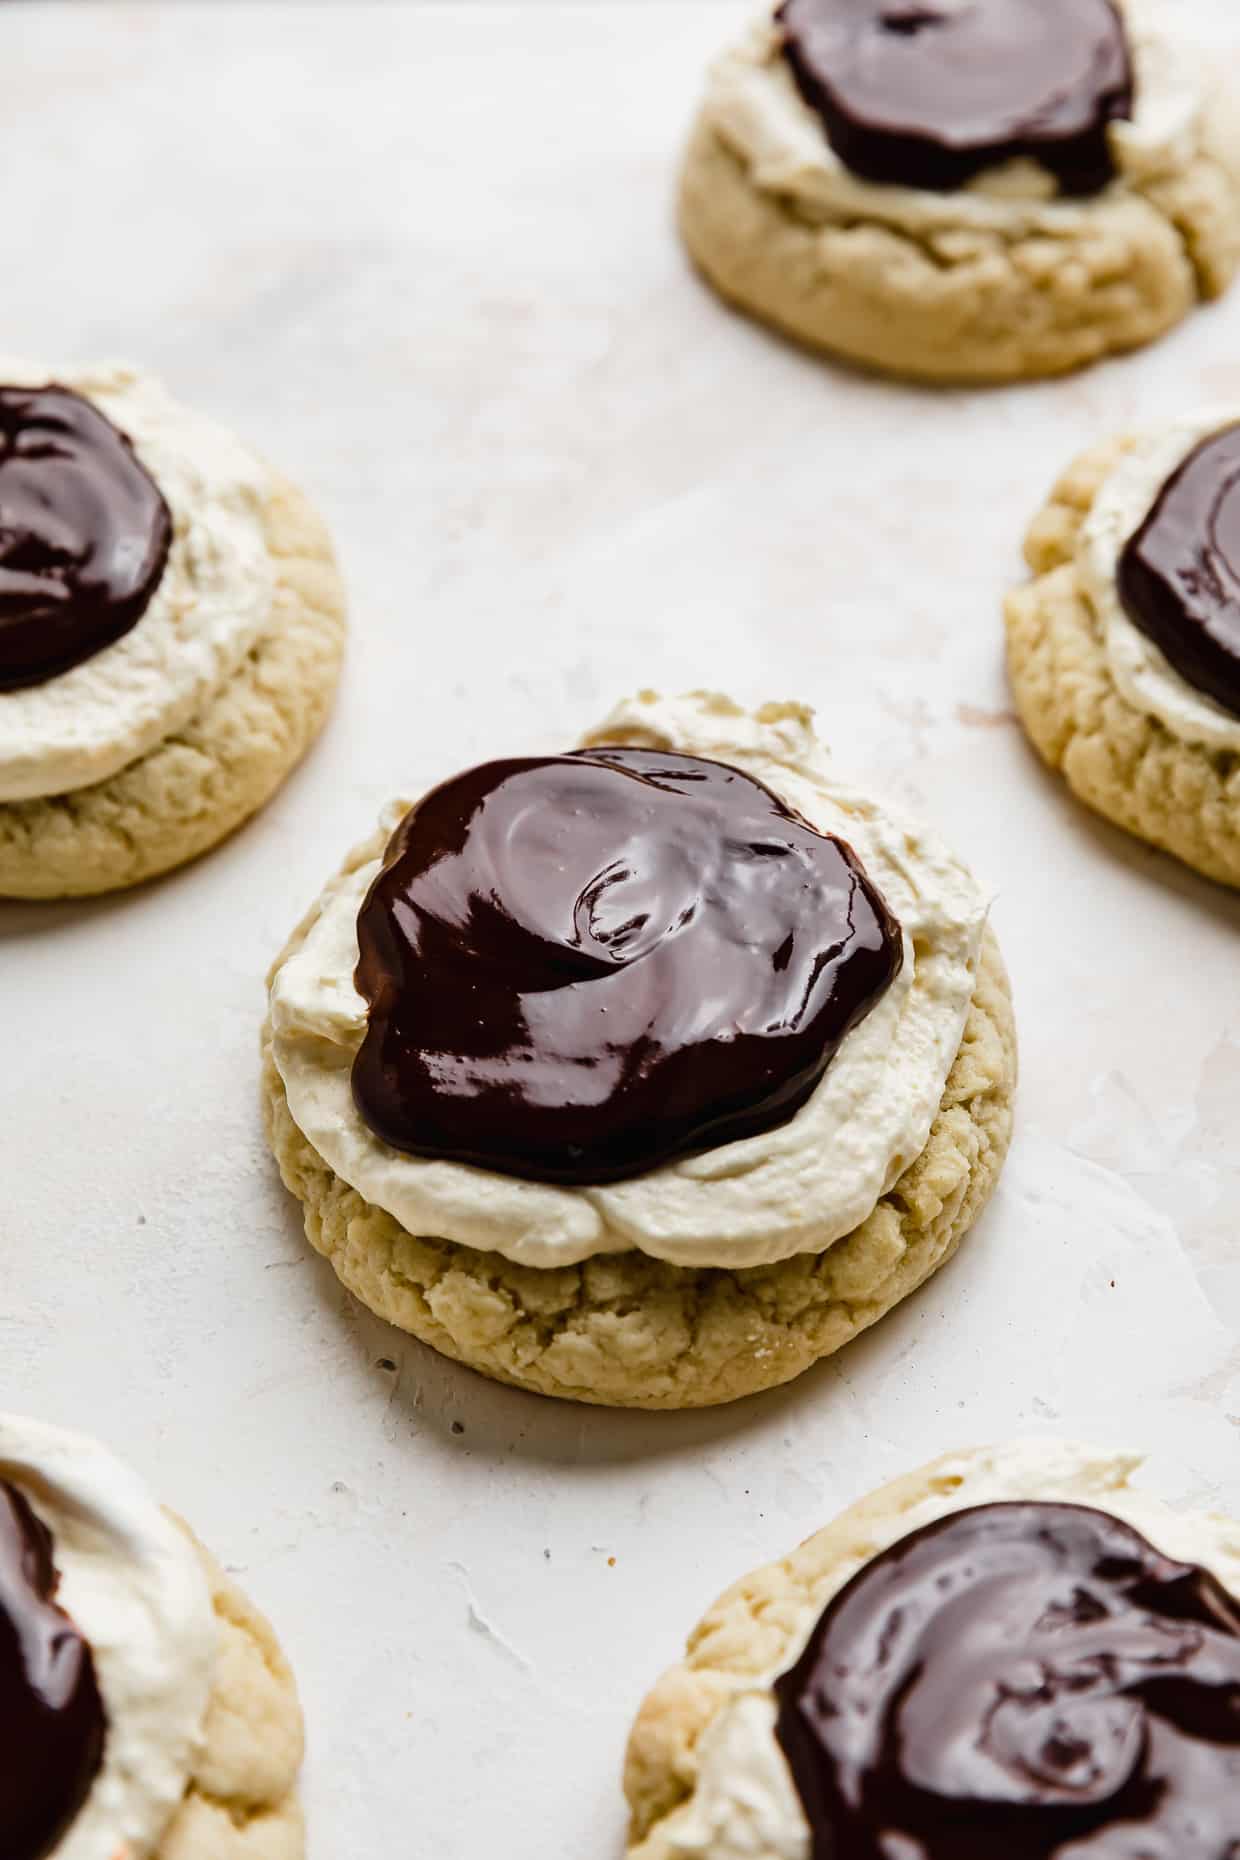 Crumbl Boston Cream Pie Cookies with a chocolate ganache on top of the cream covered cookies.